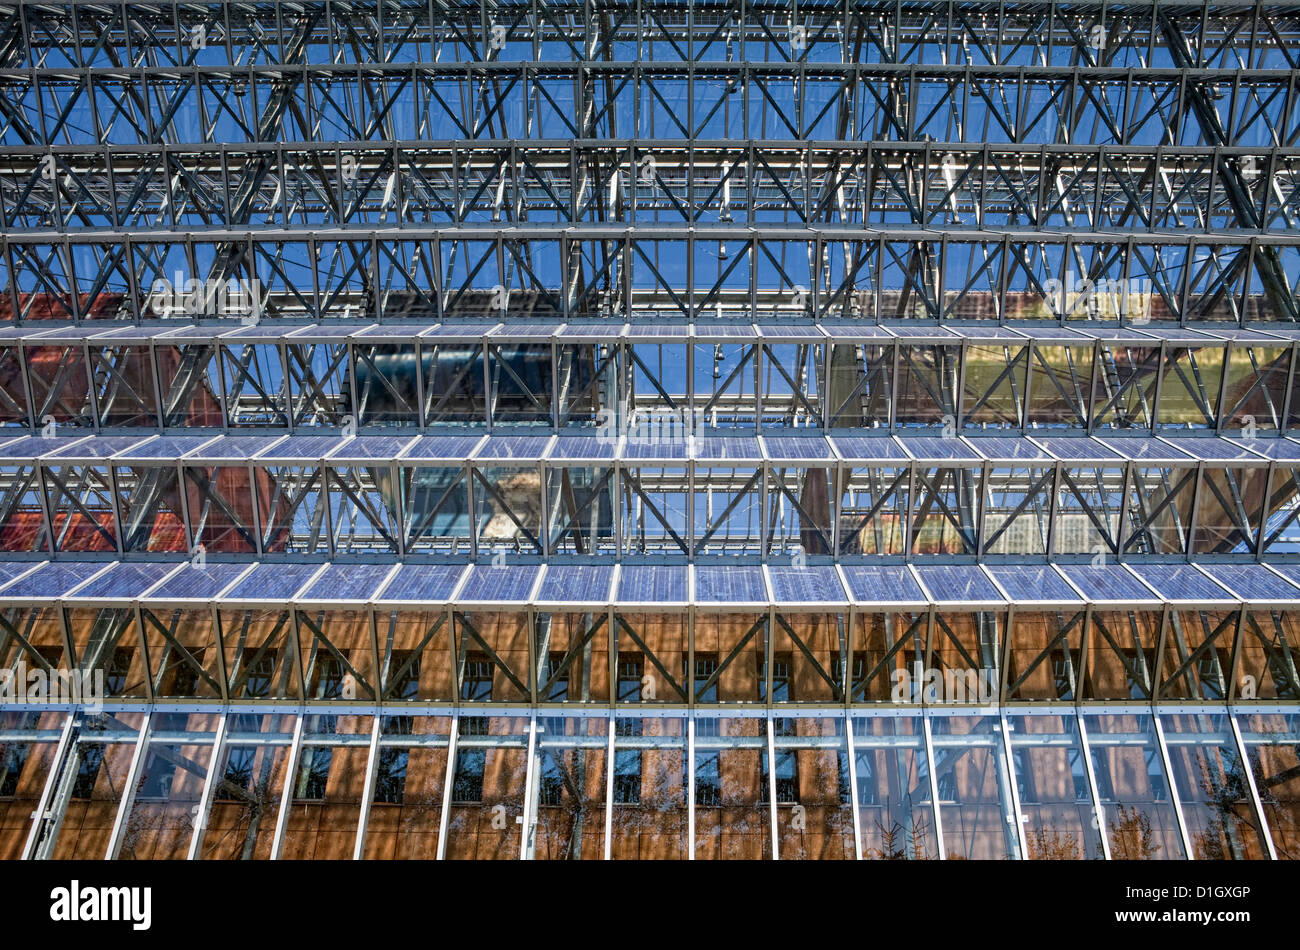 glass front with solar panels on its facade,  Euro Space Center, Transinne, Belgium Stock Photo